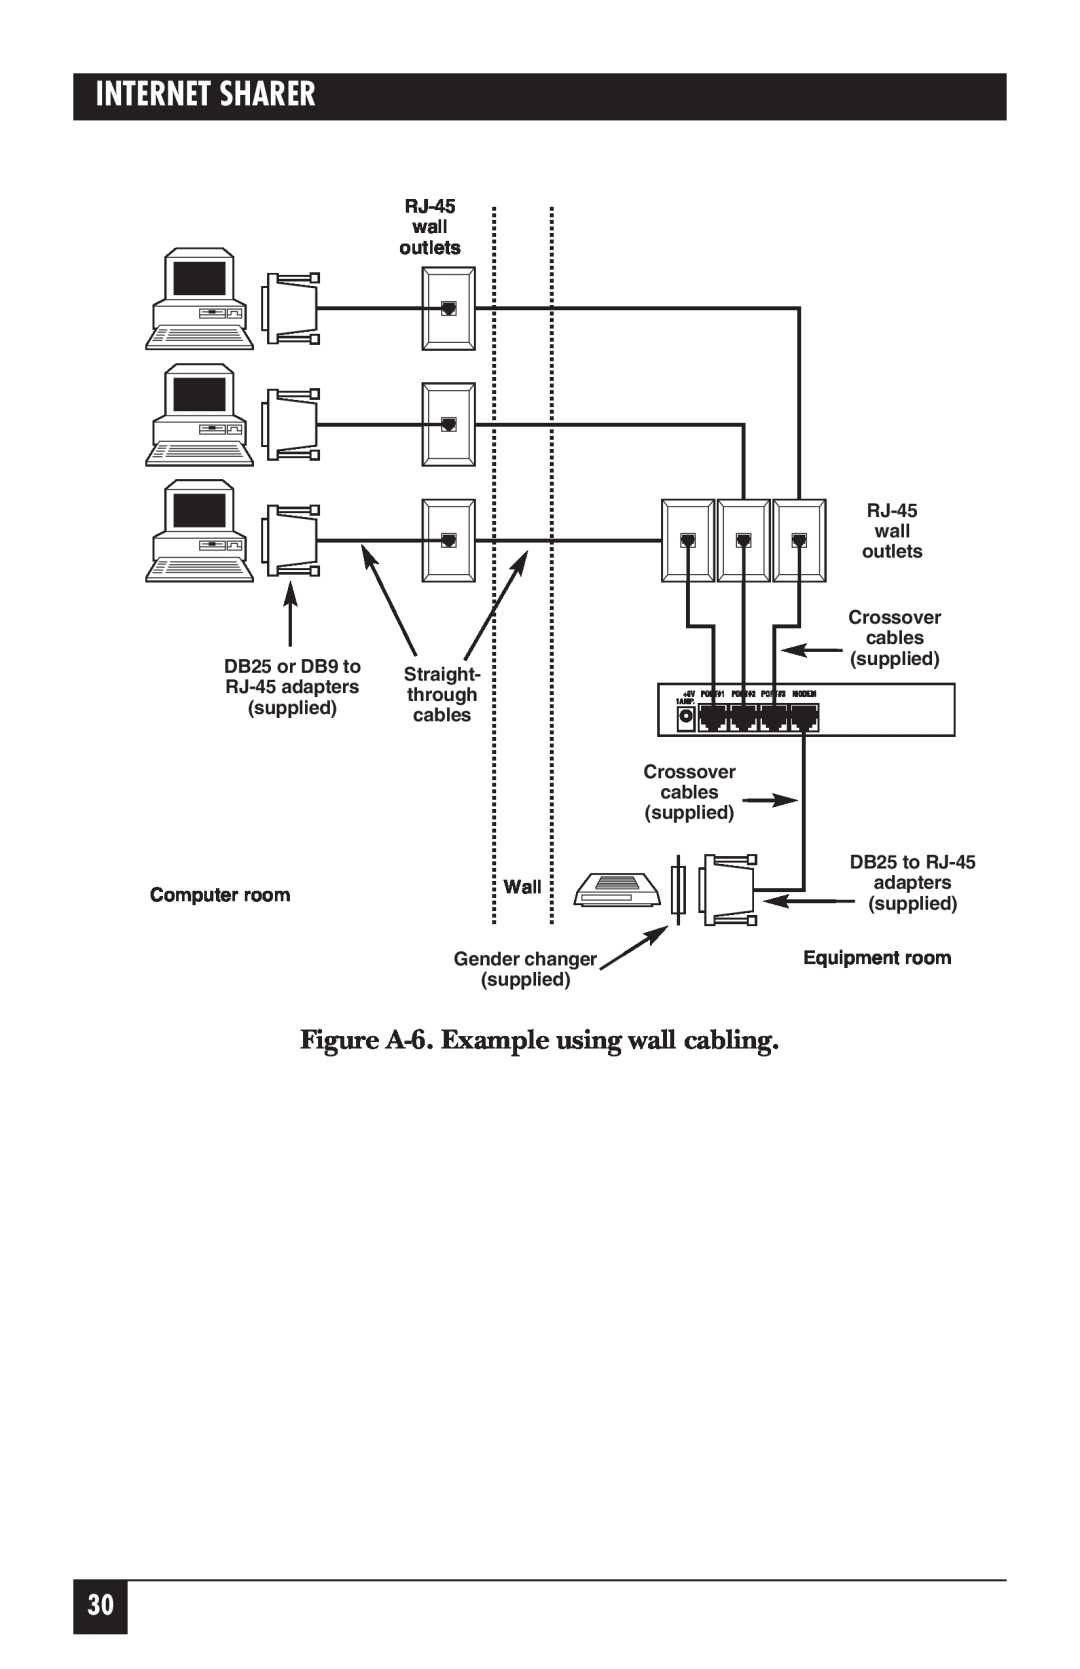 Black Box FX850A Figure A-6. Example using wall cabling, Internet Sharer, RJ-45 wall outlets, Crossover, cables, Straight 